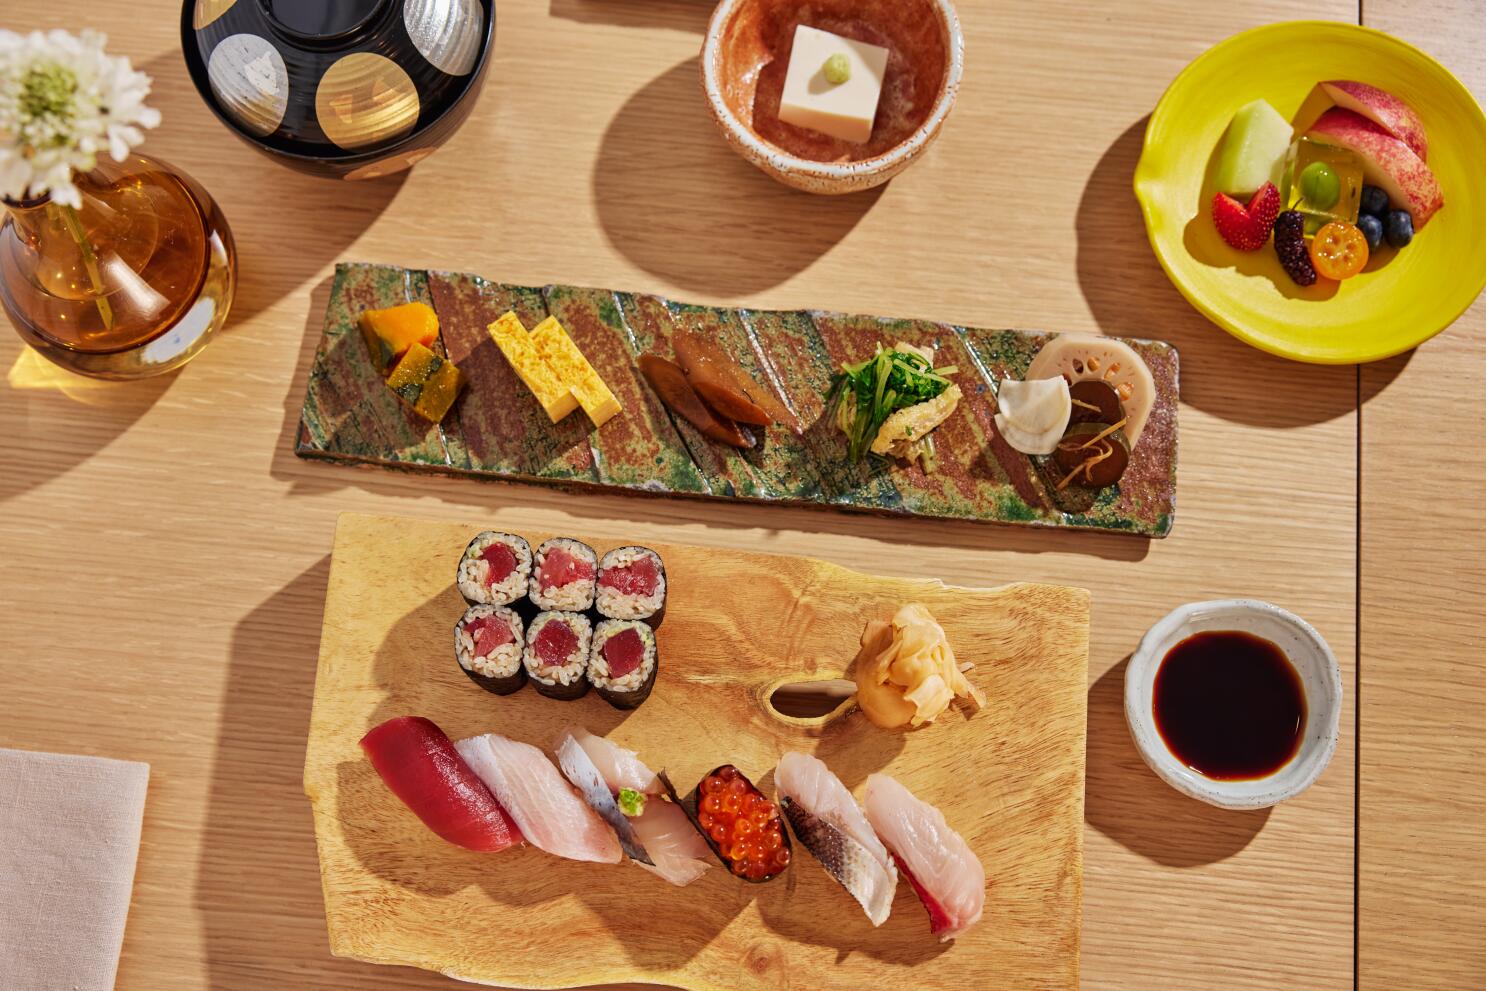 Sushi-GO Review: Sushi Chain With Over 150 Dishes